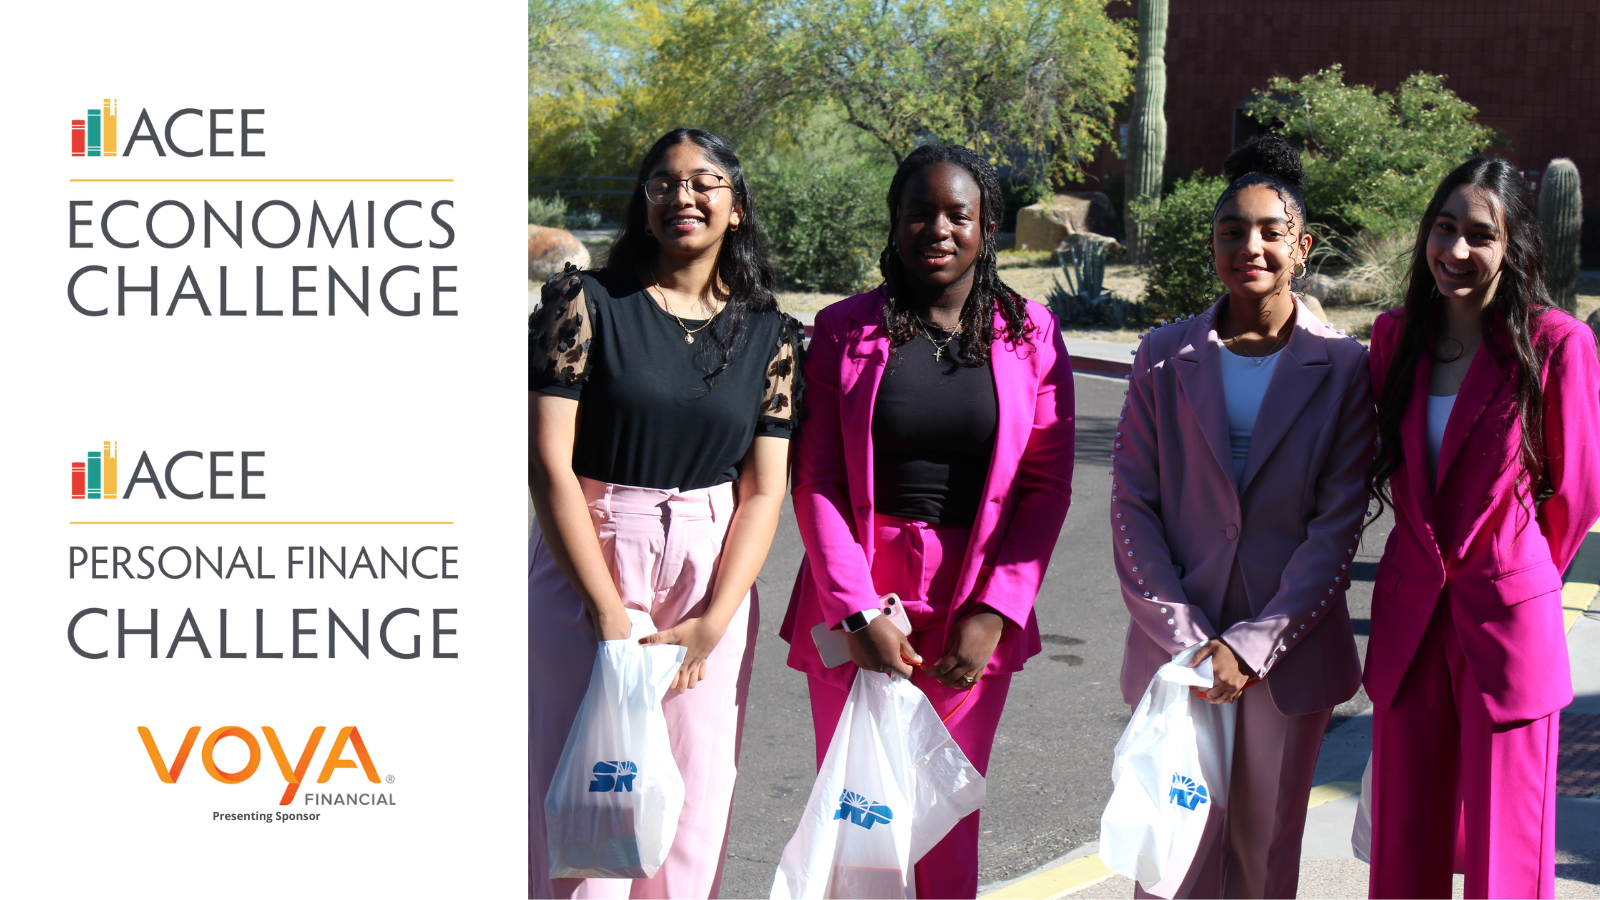 Personal Finance Challenge and Economics Challenge logos with a photo of girls dressed professionally.